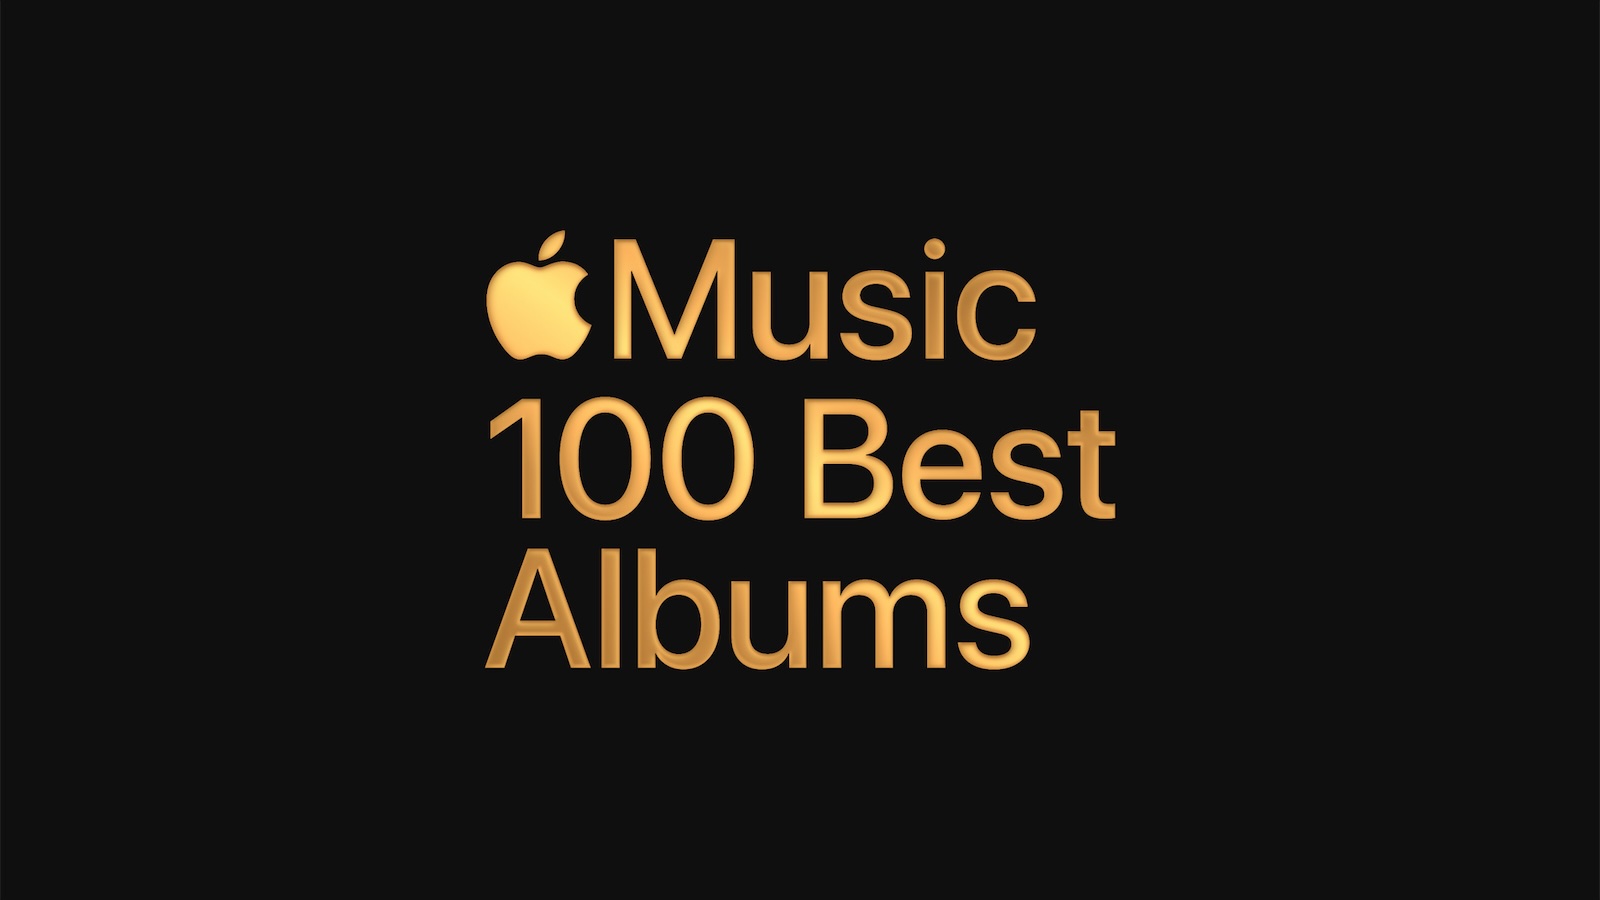 Apple Music Counting Down 100 Best Albums of All Time